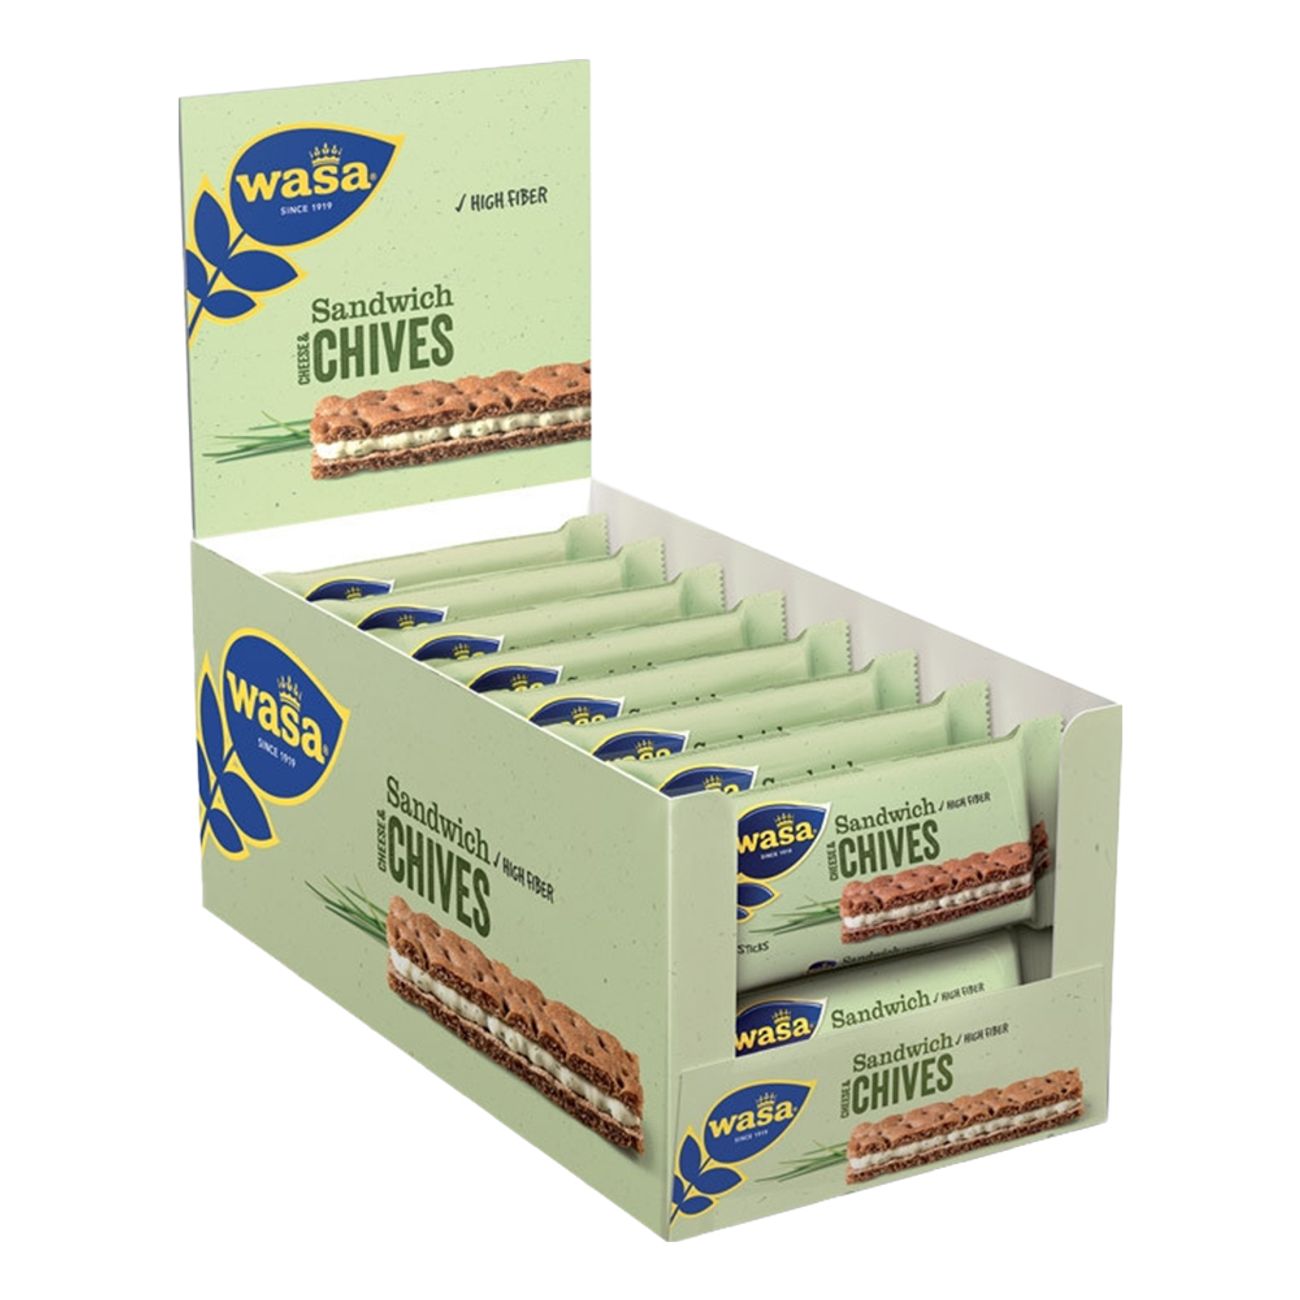 wasa-sandwich-cheese-chives-storpack-96869-2